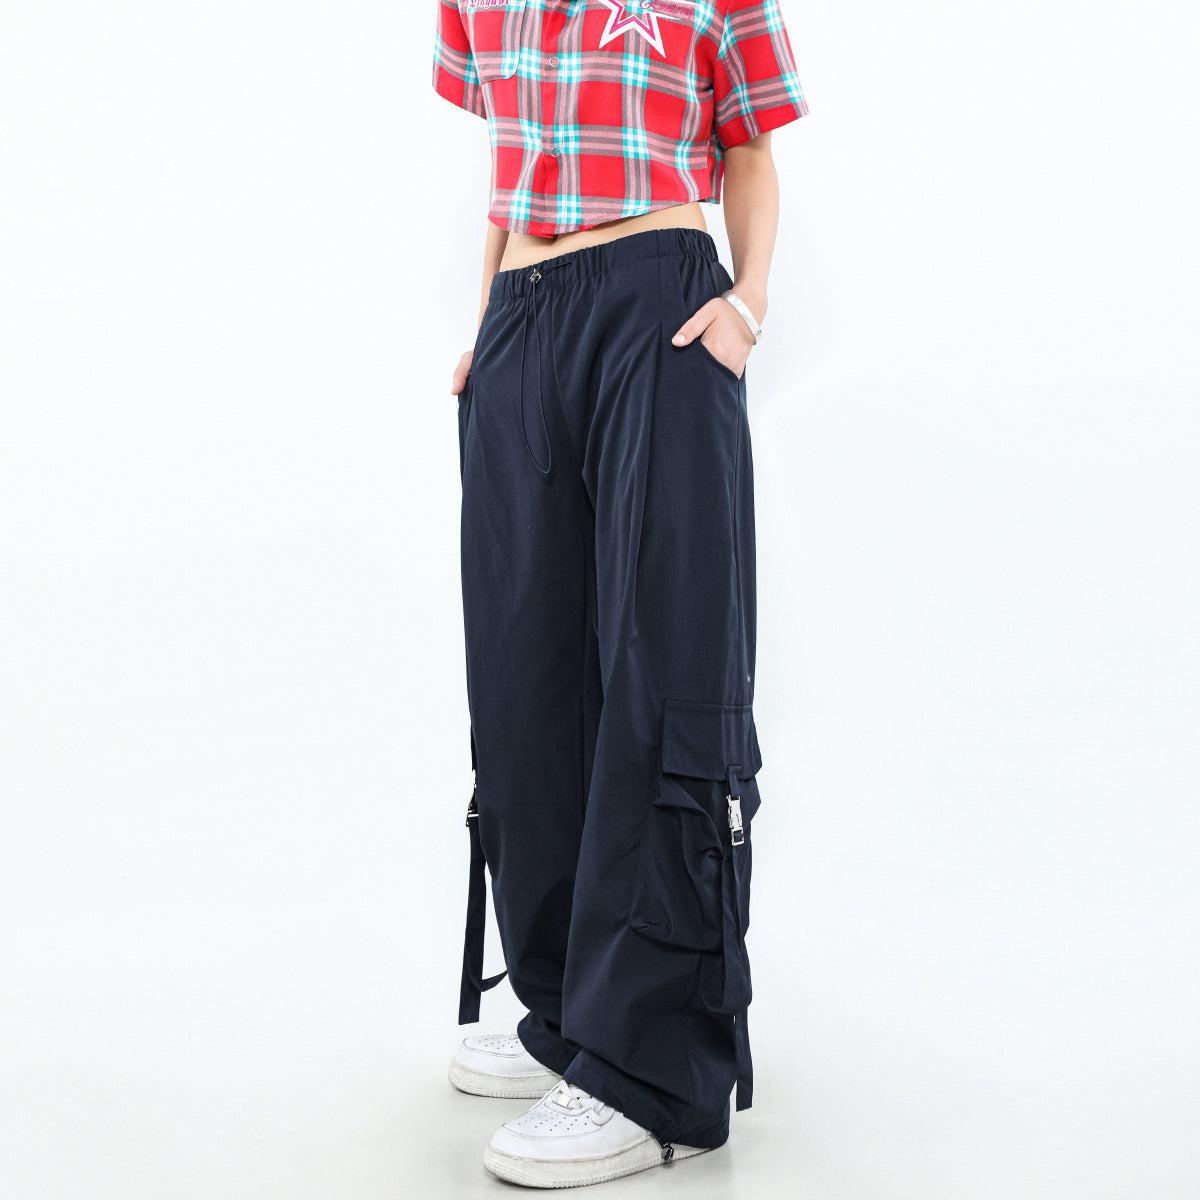 Mr Nearly Buckle Strap Pocket Cargo Pants Korean Street Fashion Pants By Mr Nearly Shop Online at OH Vault